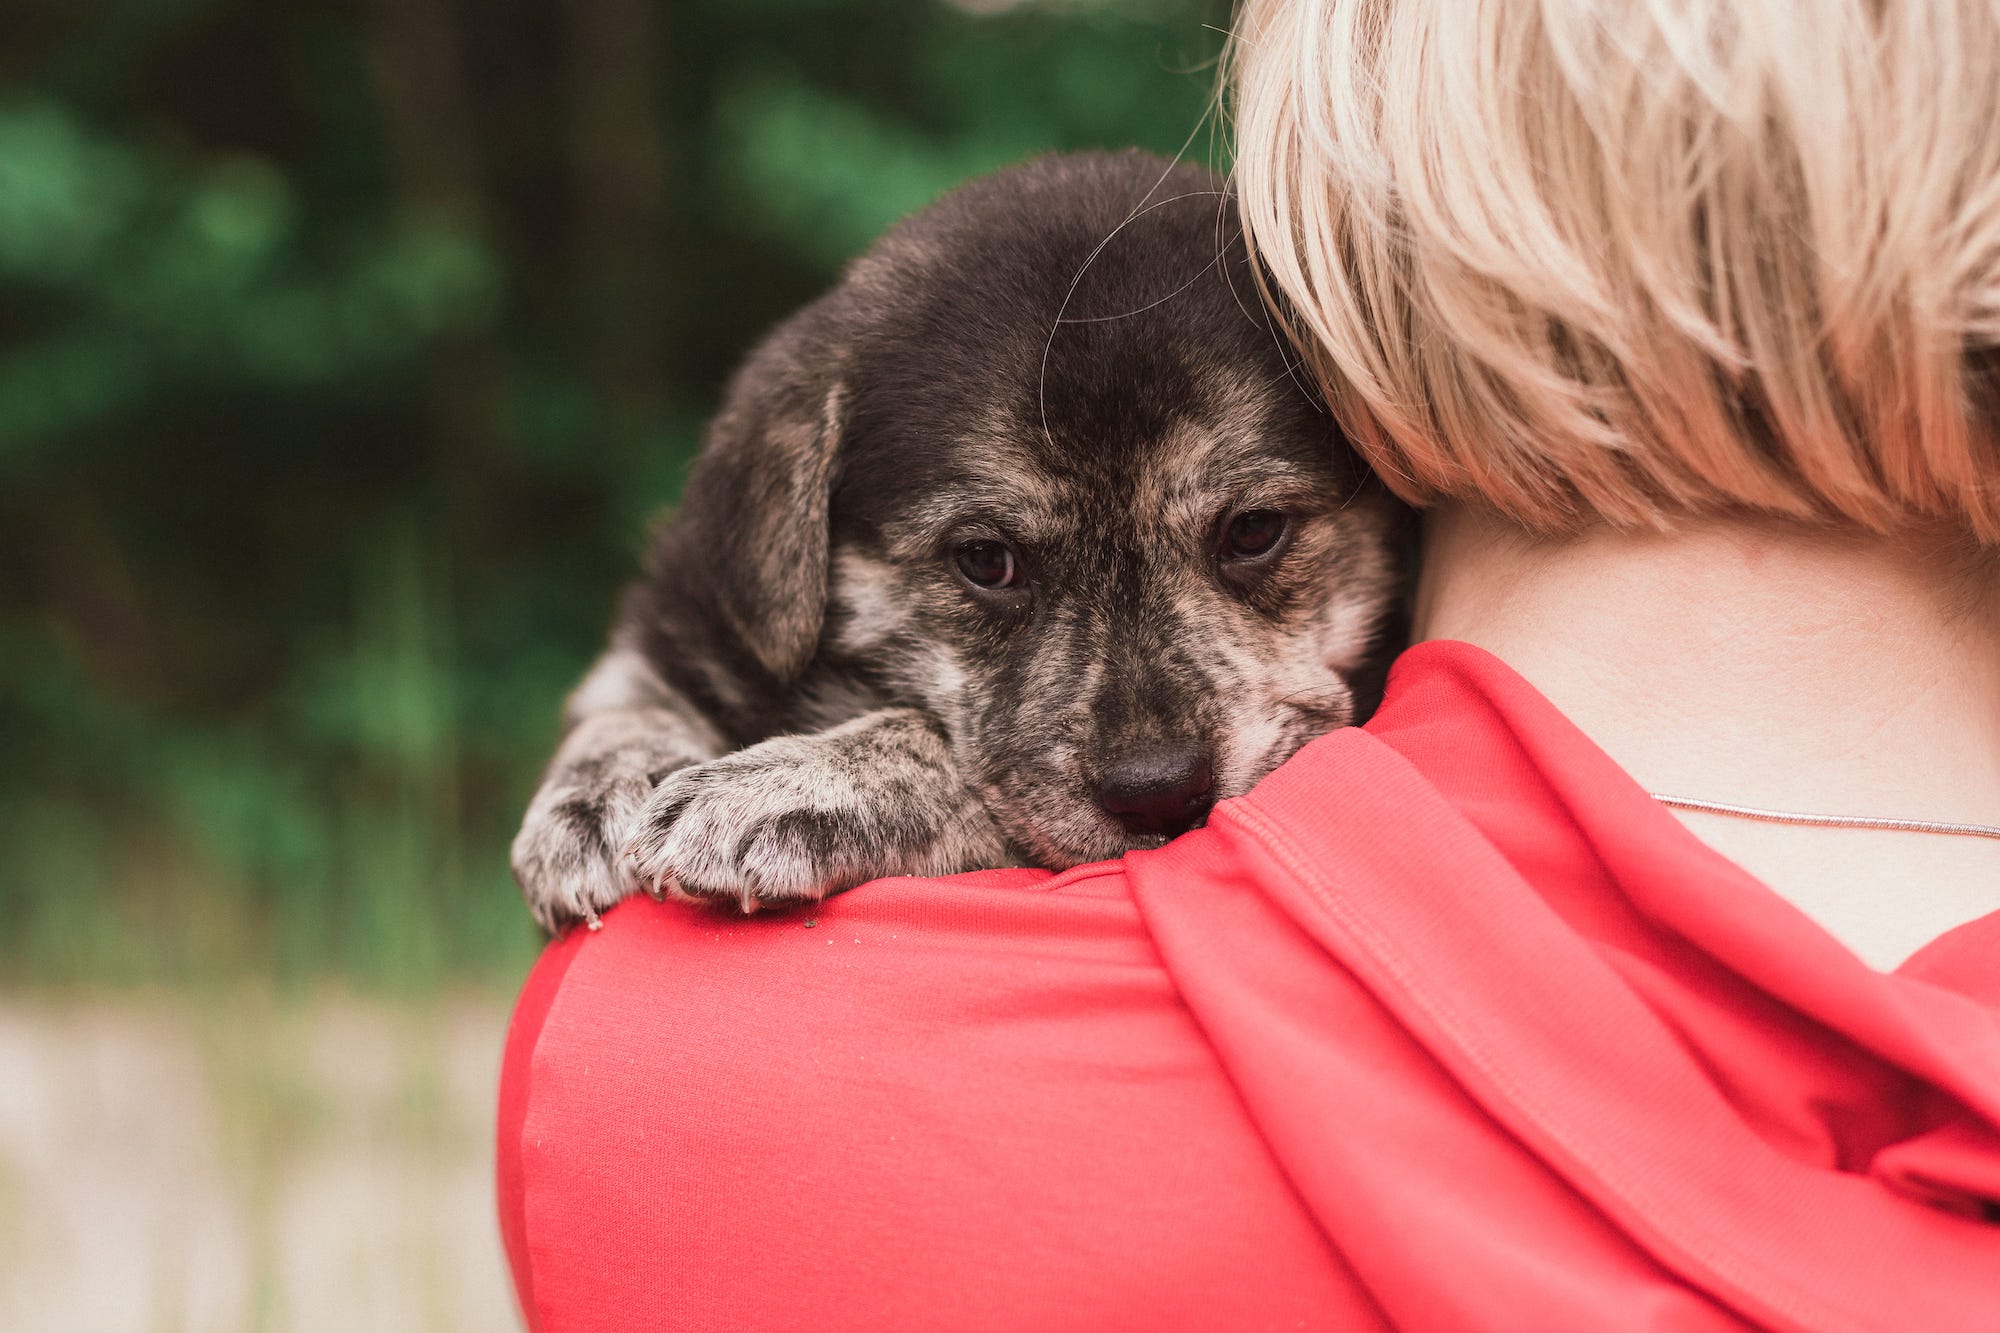 Image shows woman hugging puppy.